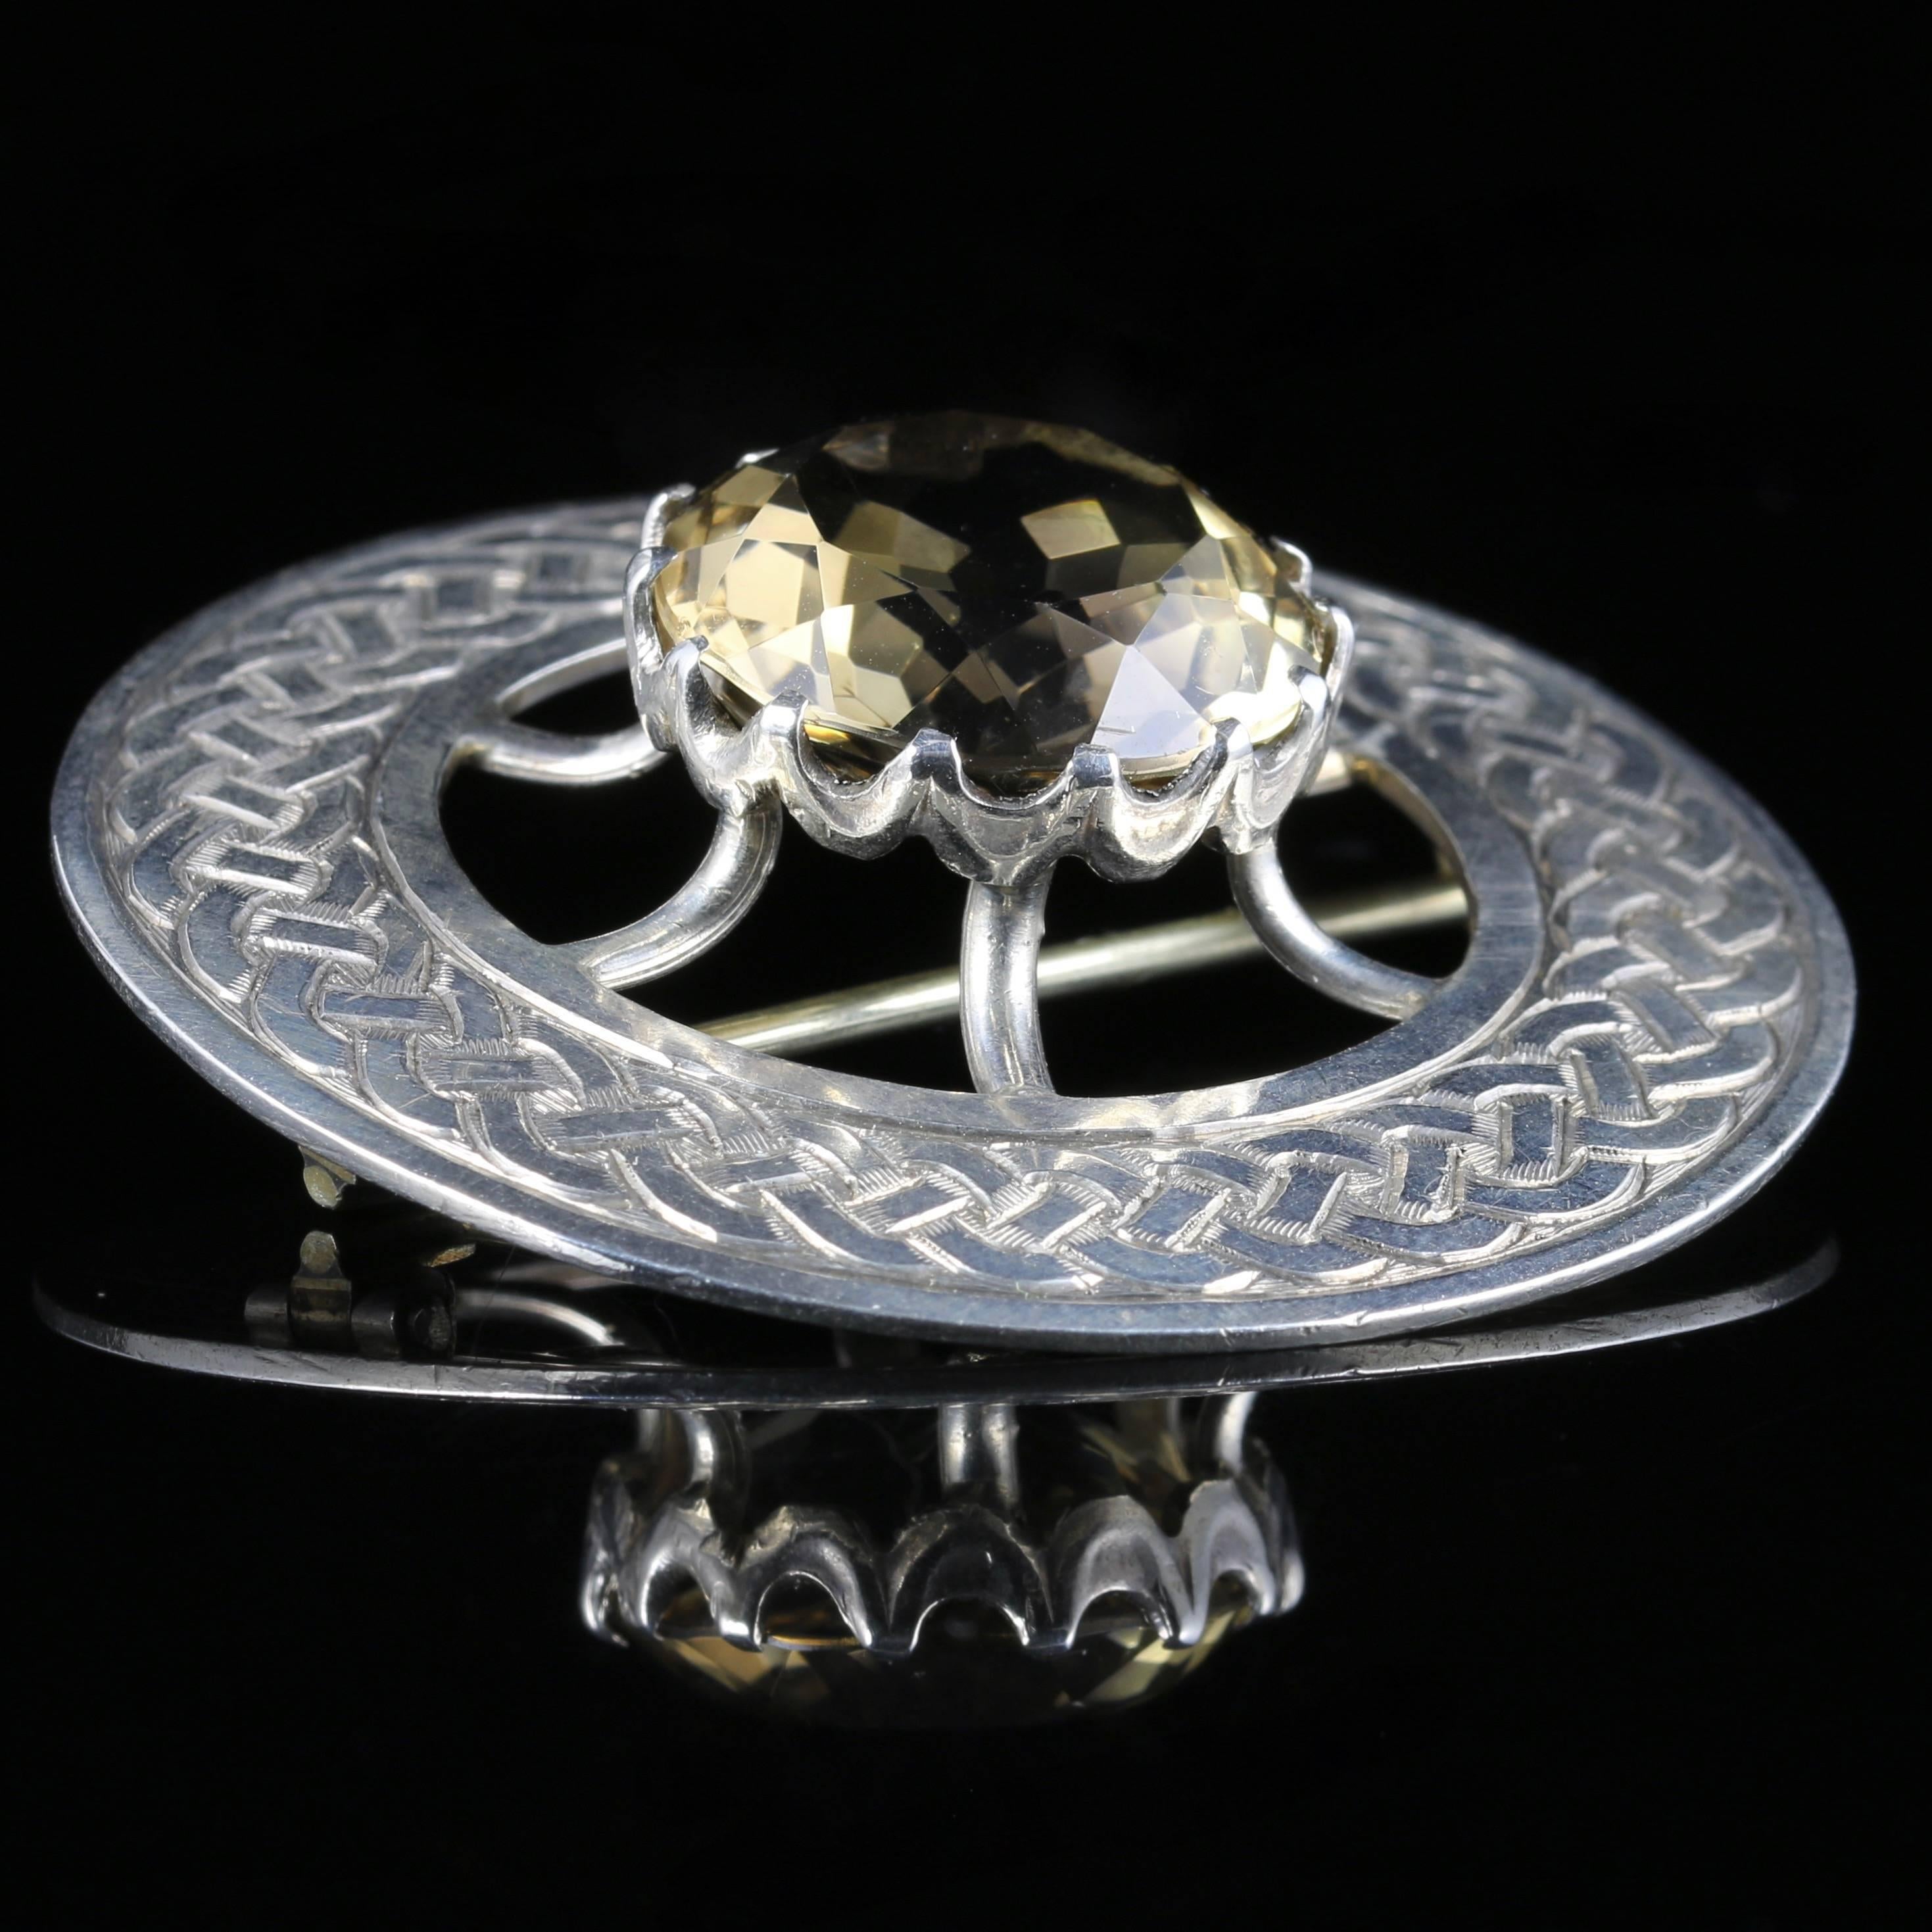 This fabulous Vintage Sterling Silver Scottish brooch is exquisite, set with beautiful workmanship.

A beautiful large brooch that has a lovely Celtic design chasing around the gallery.

The brooch is set with a large central Citrine which is over